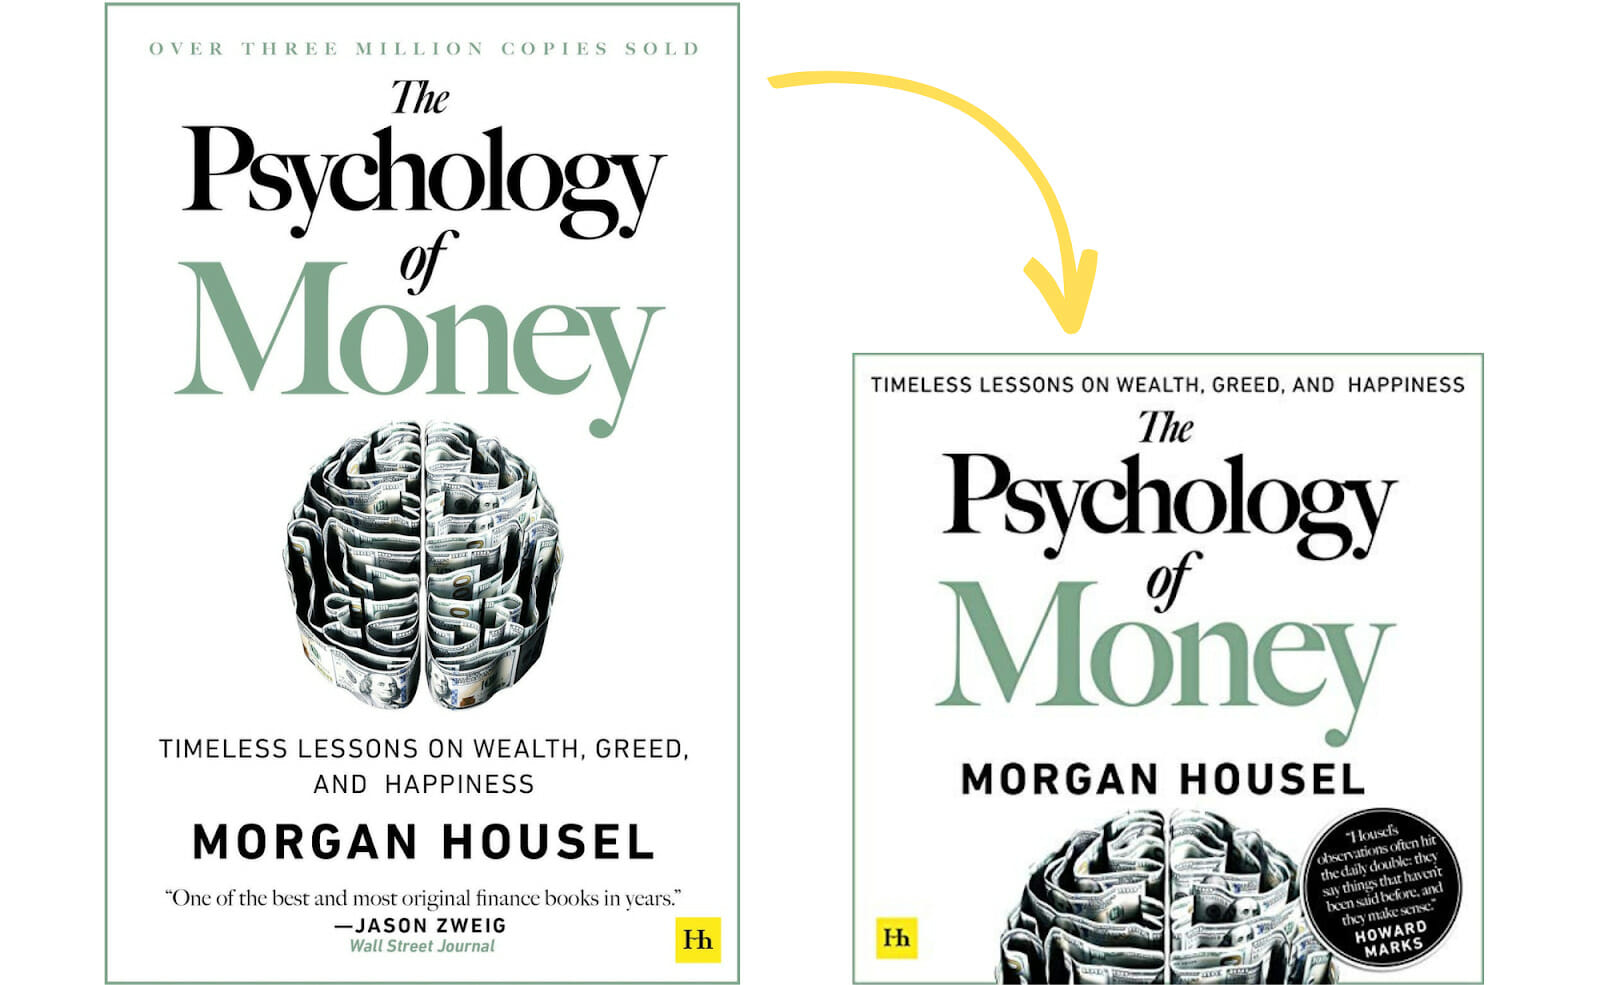 Designing audiobook covers featuring The Psychology of Money by Morgan Housel